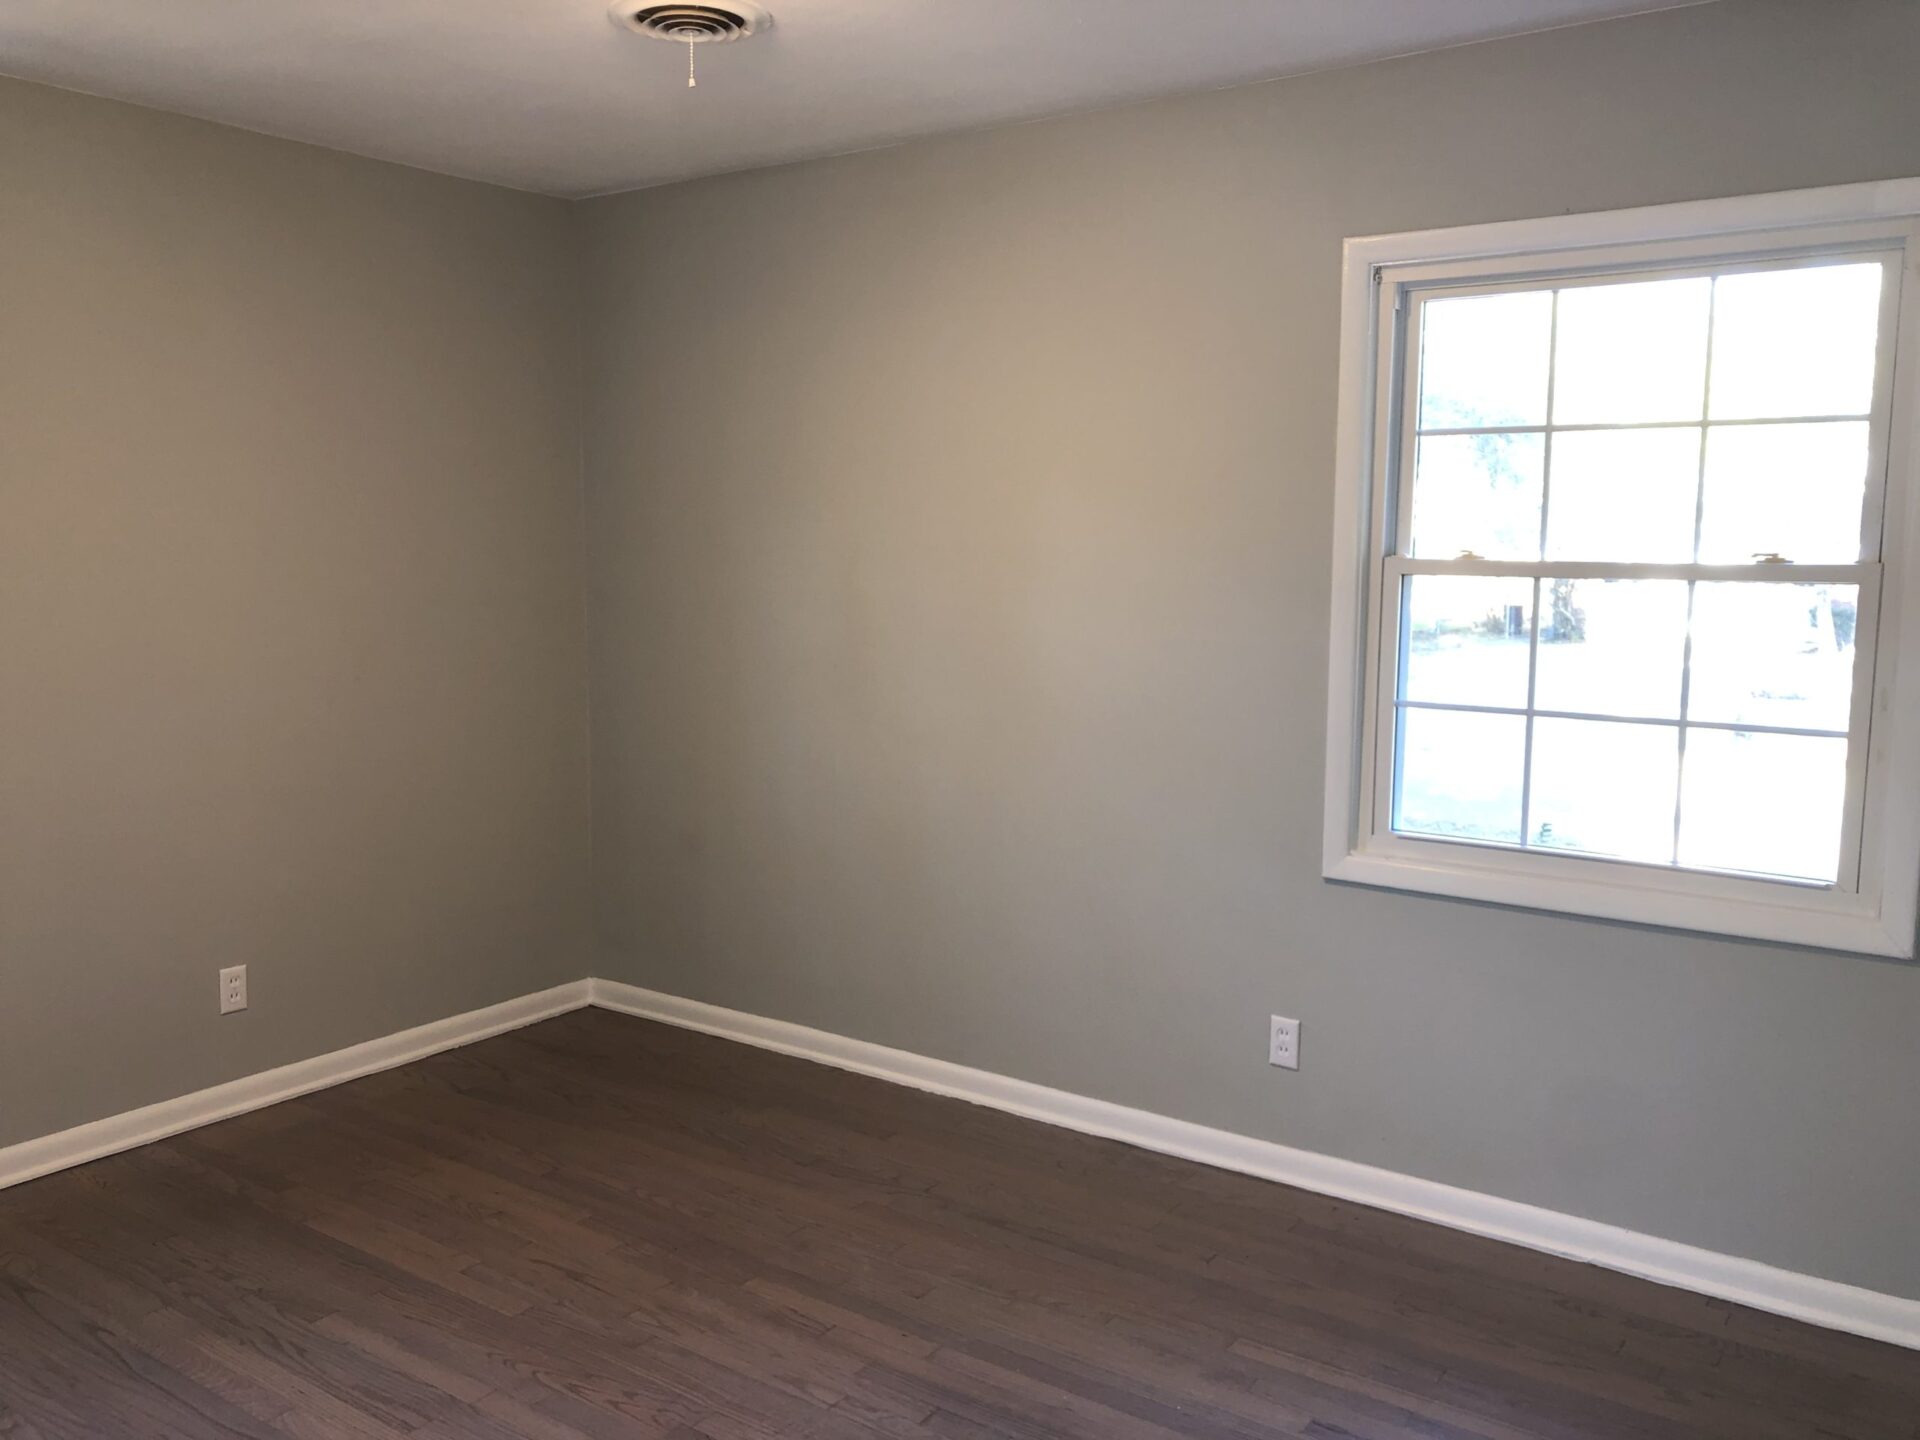 An empty unfurnished room